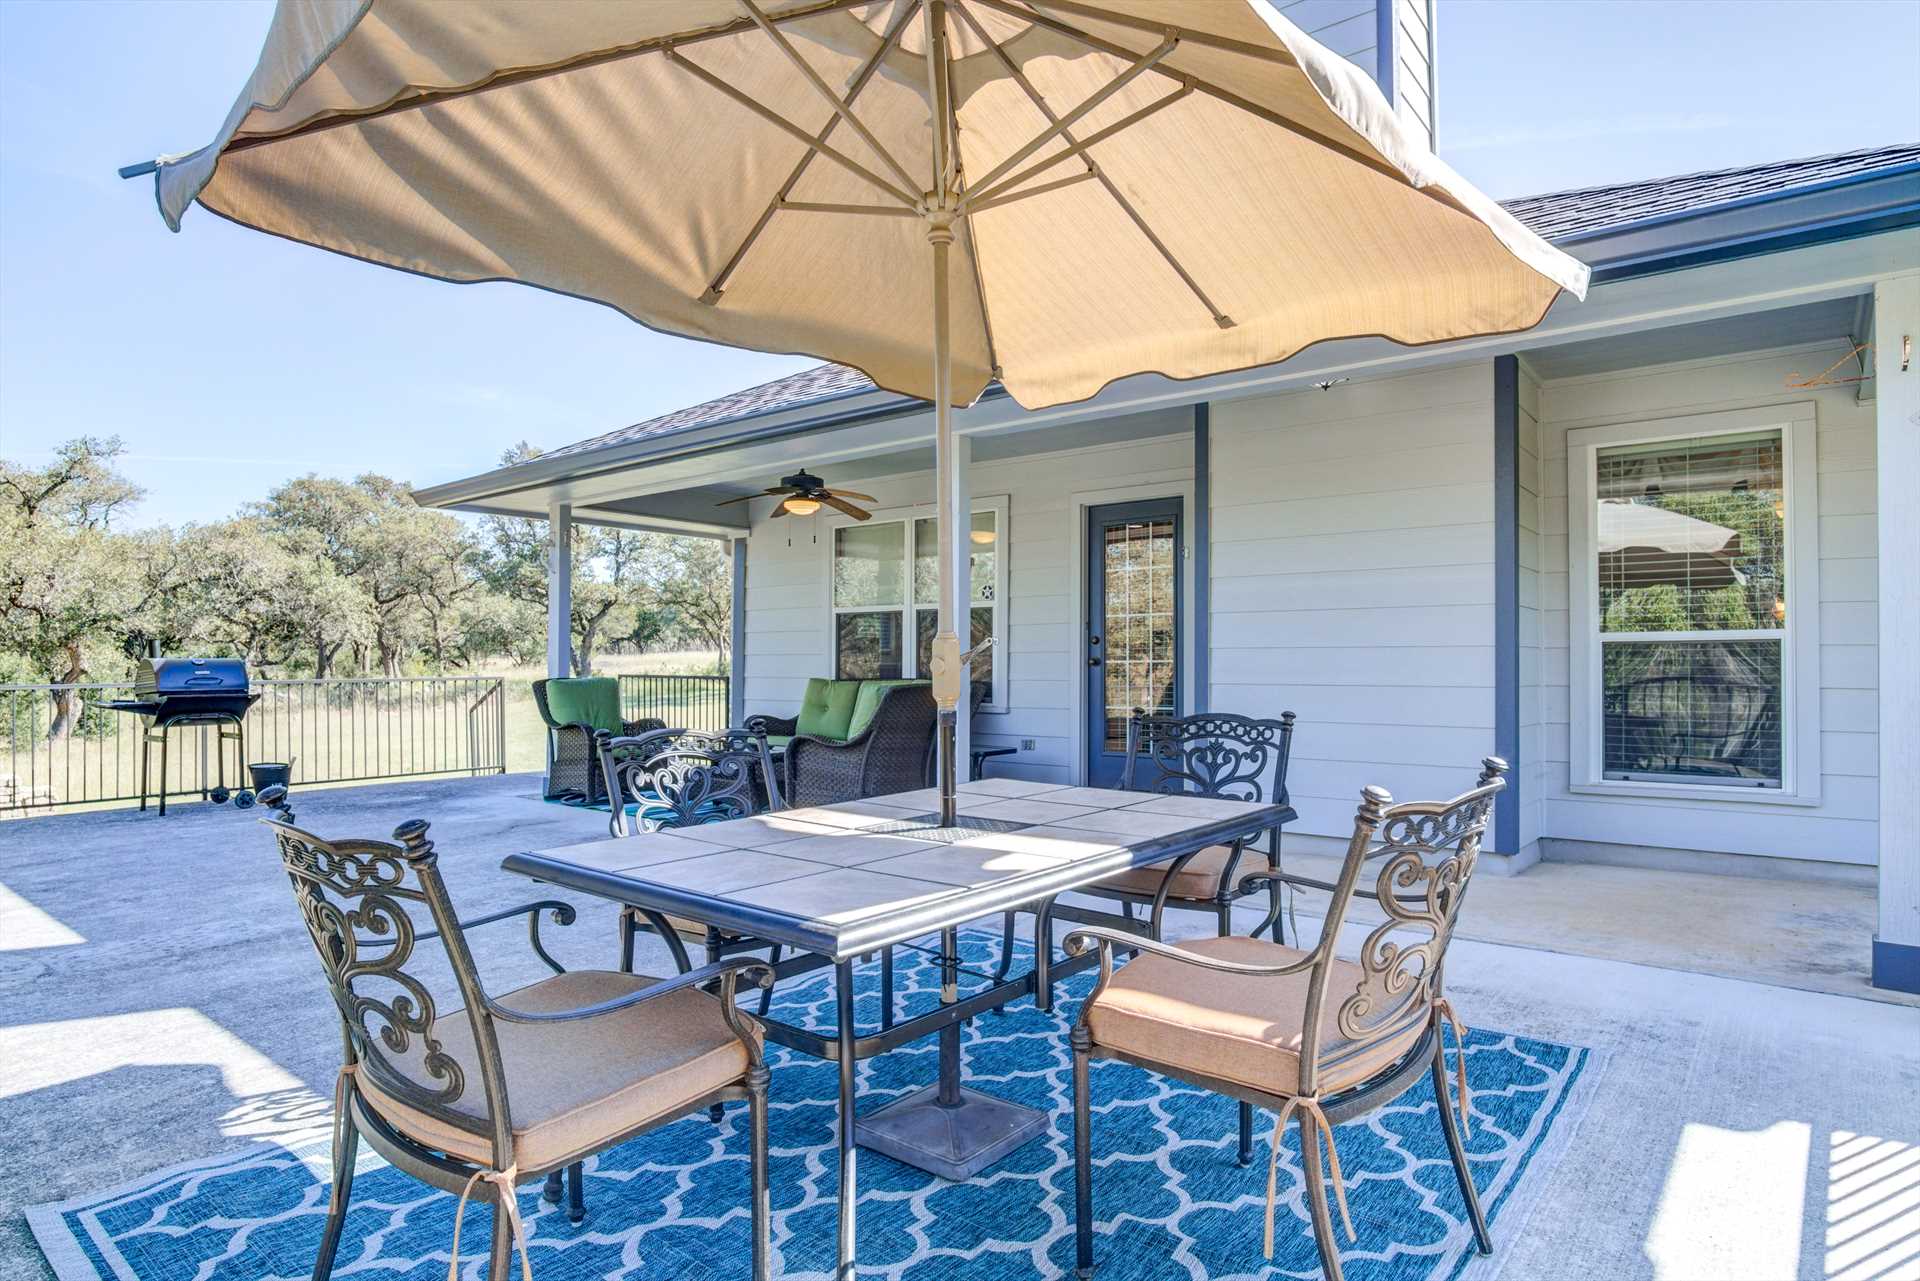                                                 The enormous outdoor patio includes a large table with an umbrella for adjustable shade, and there's also a charcoal grill for family cookouts!